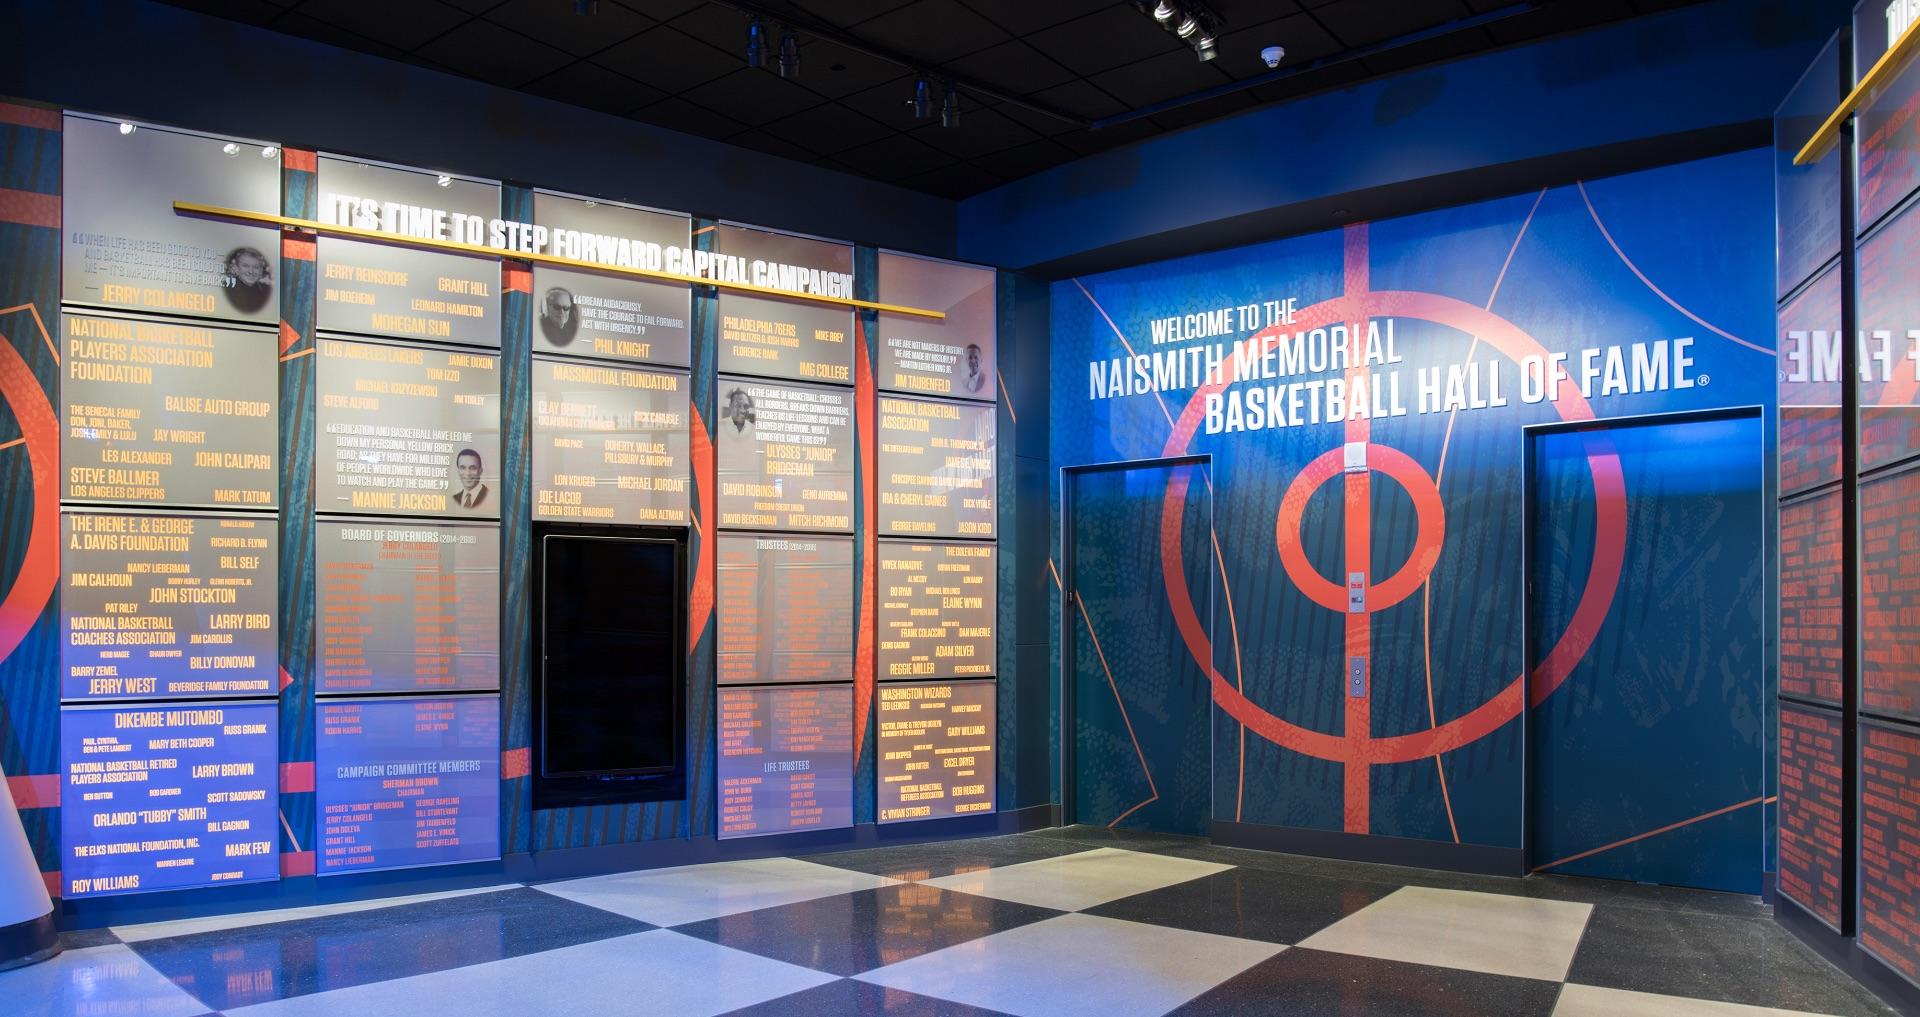 ACC Network - Wake Forest ➡️ Naismith Memorial Basketball Hall